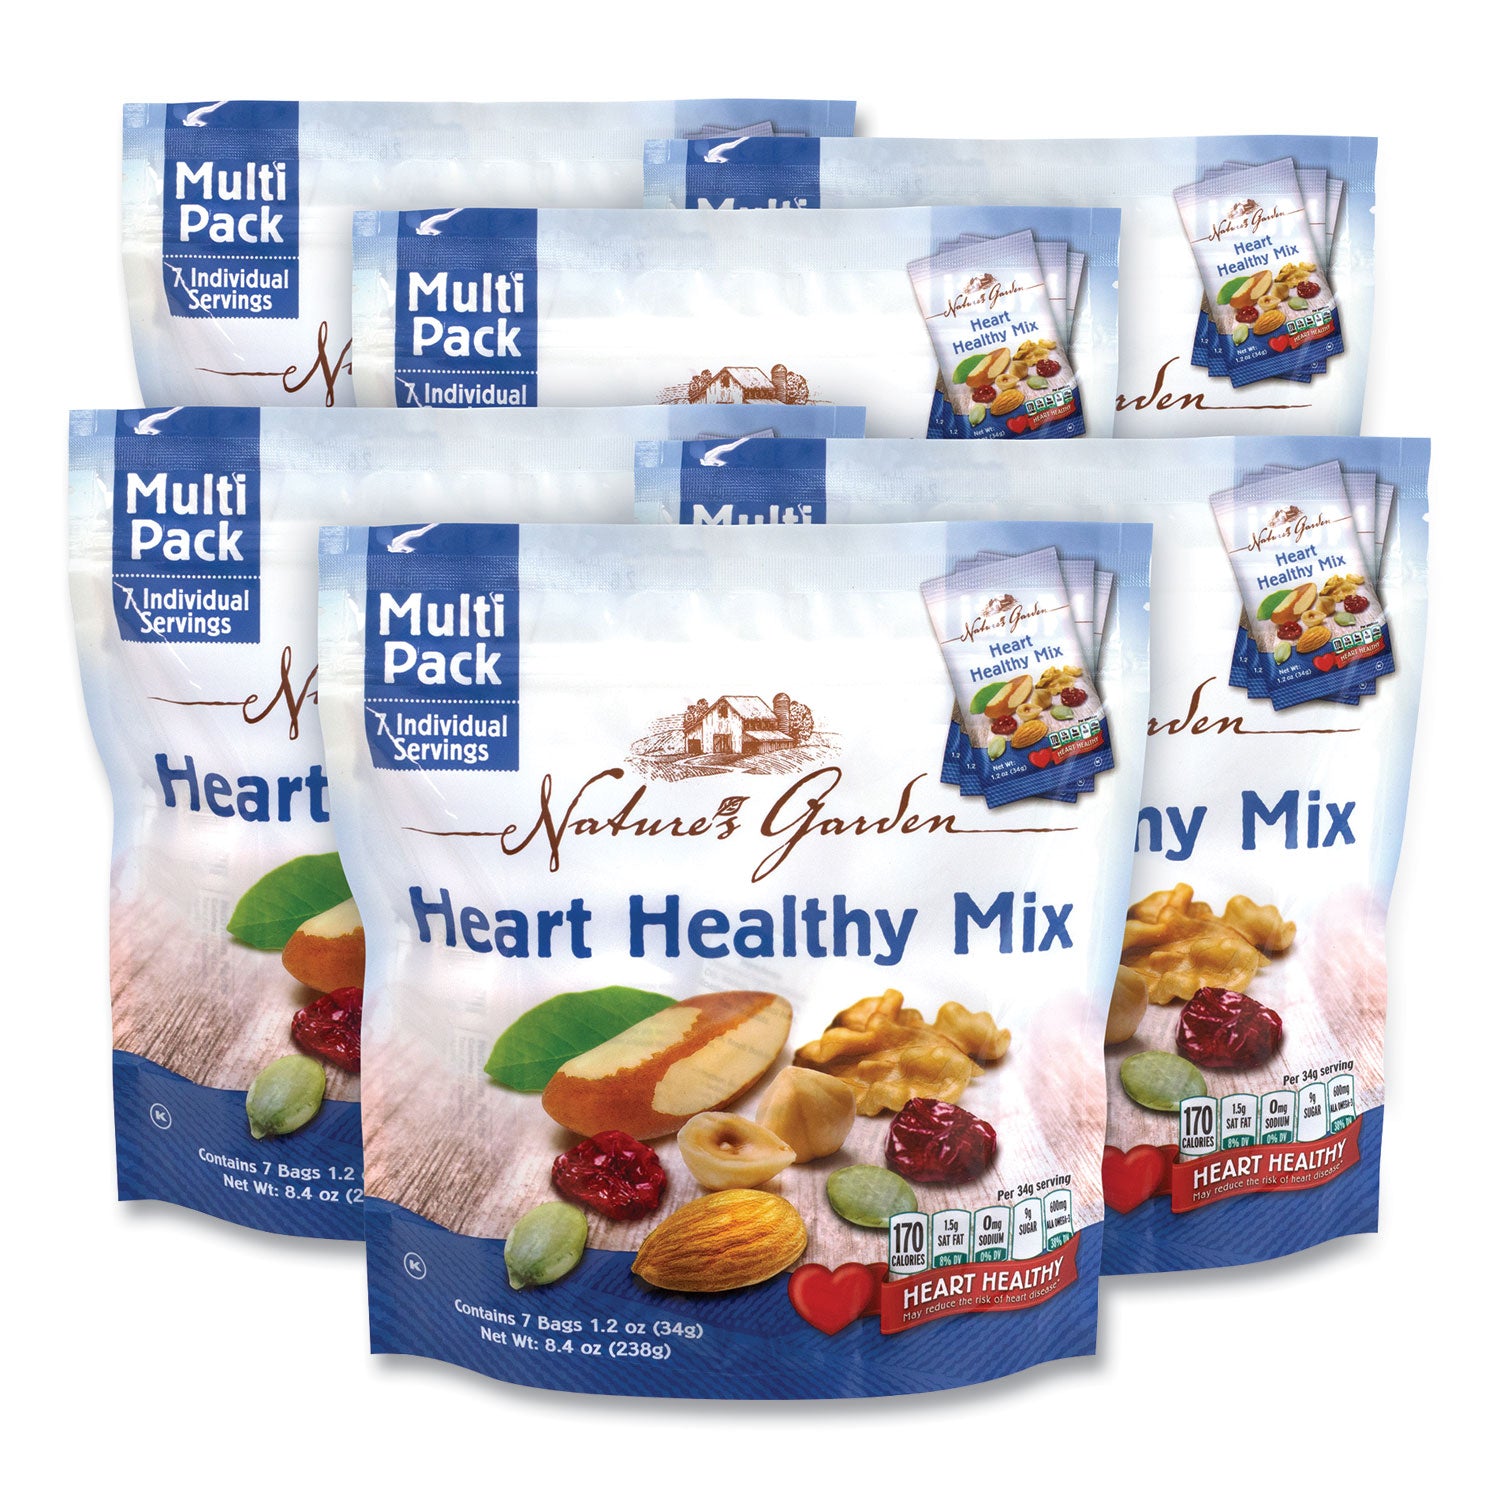 healthy-heart-mix-12-oz-pouch-7-pouches-pack-6-packs-carton-ships-in-1-3-business-days_grr29400006 - 1